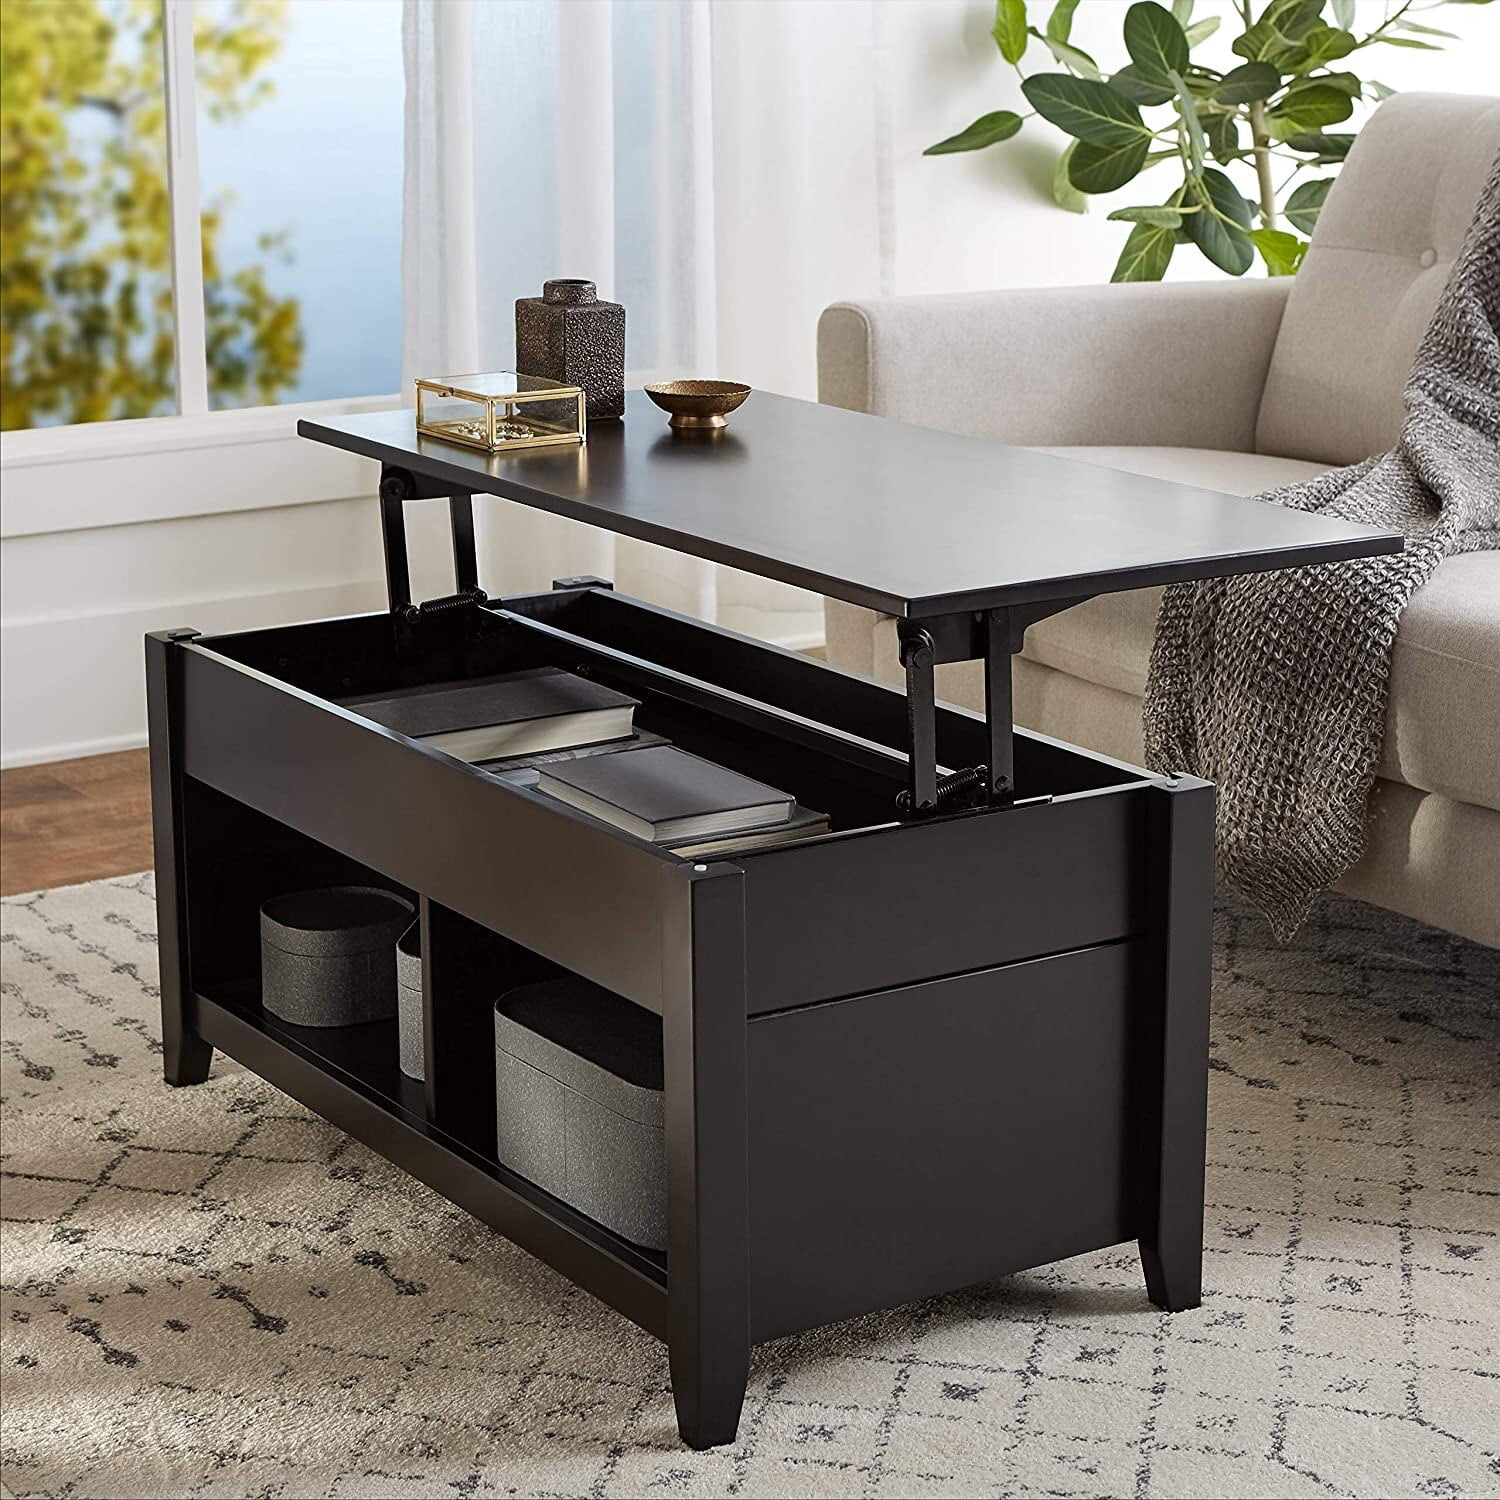 Lift Top Coffee Table W/ Hidden Compartment & Storage Shelves Modern ...